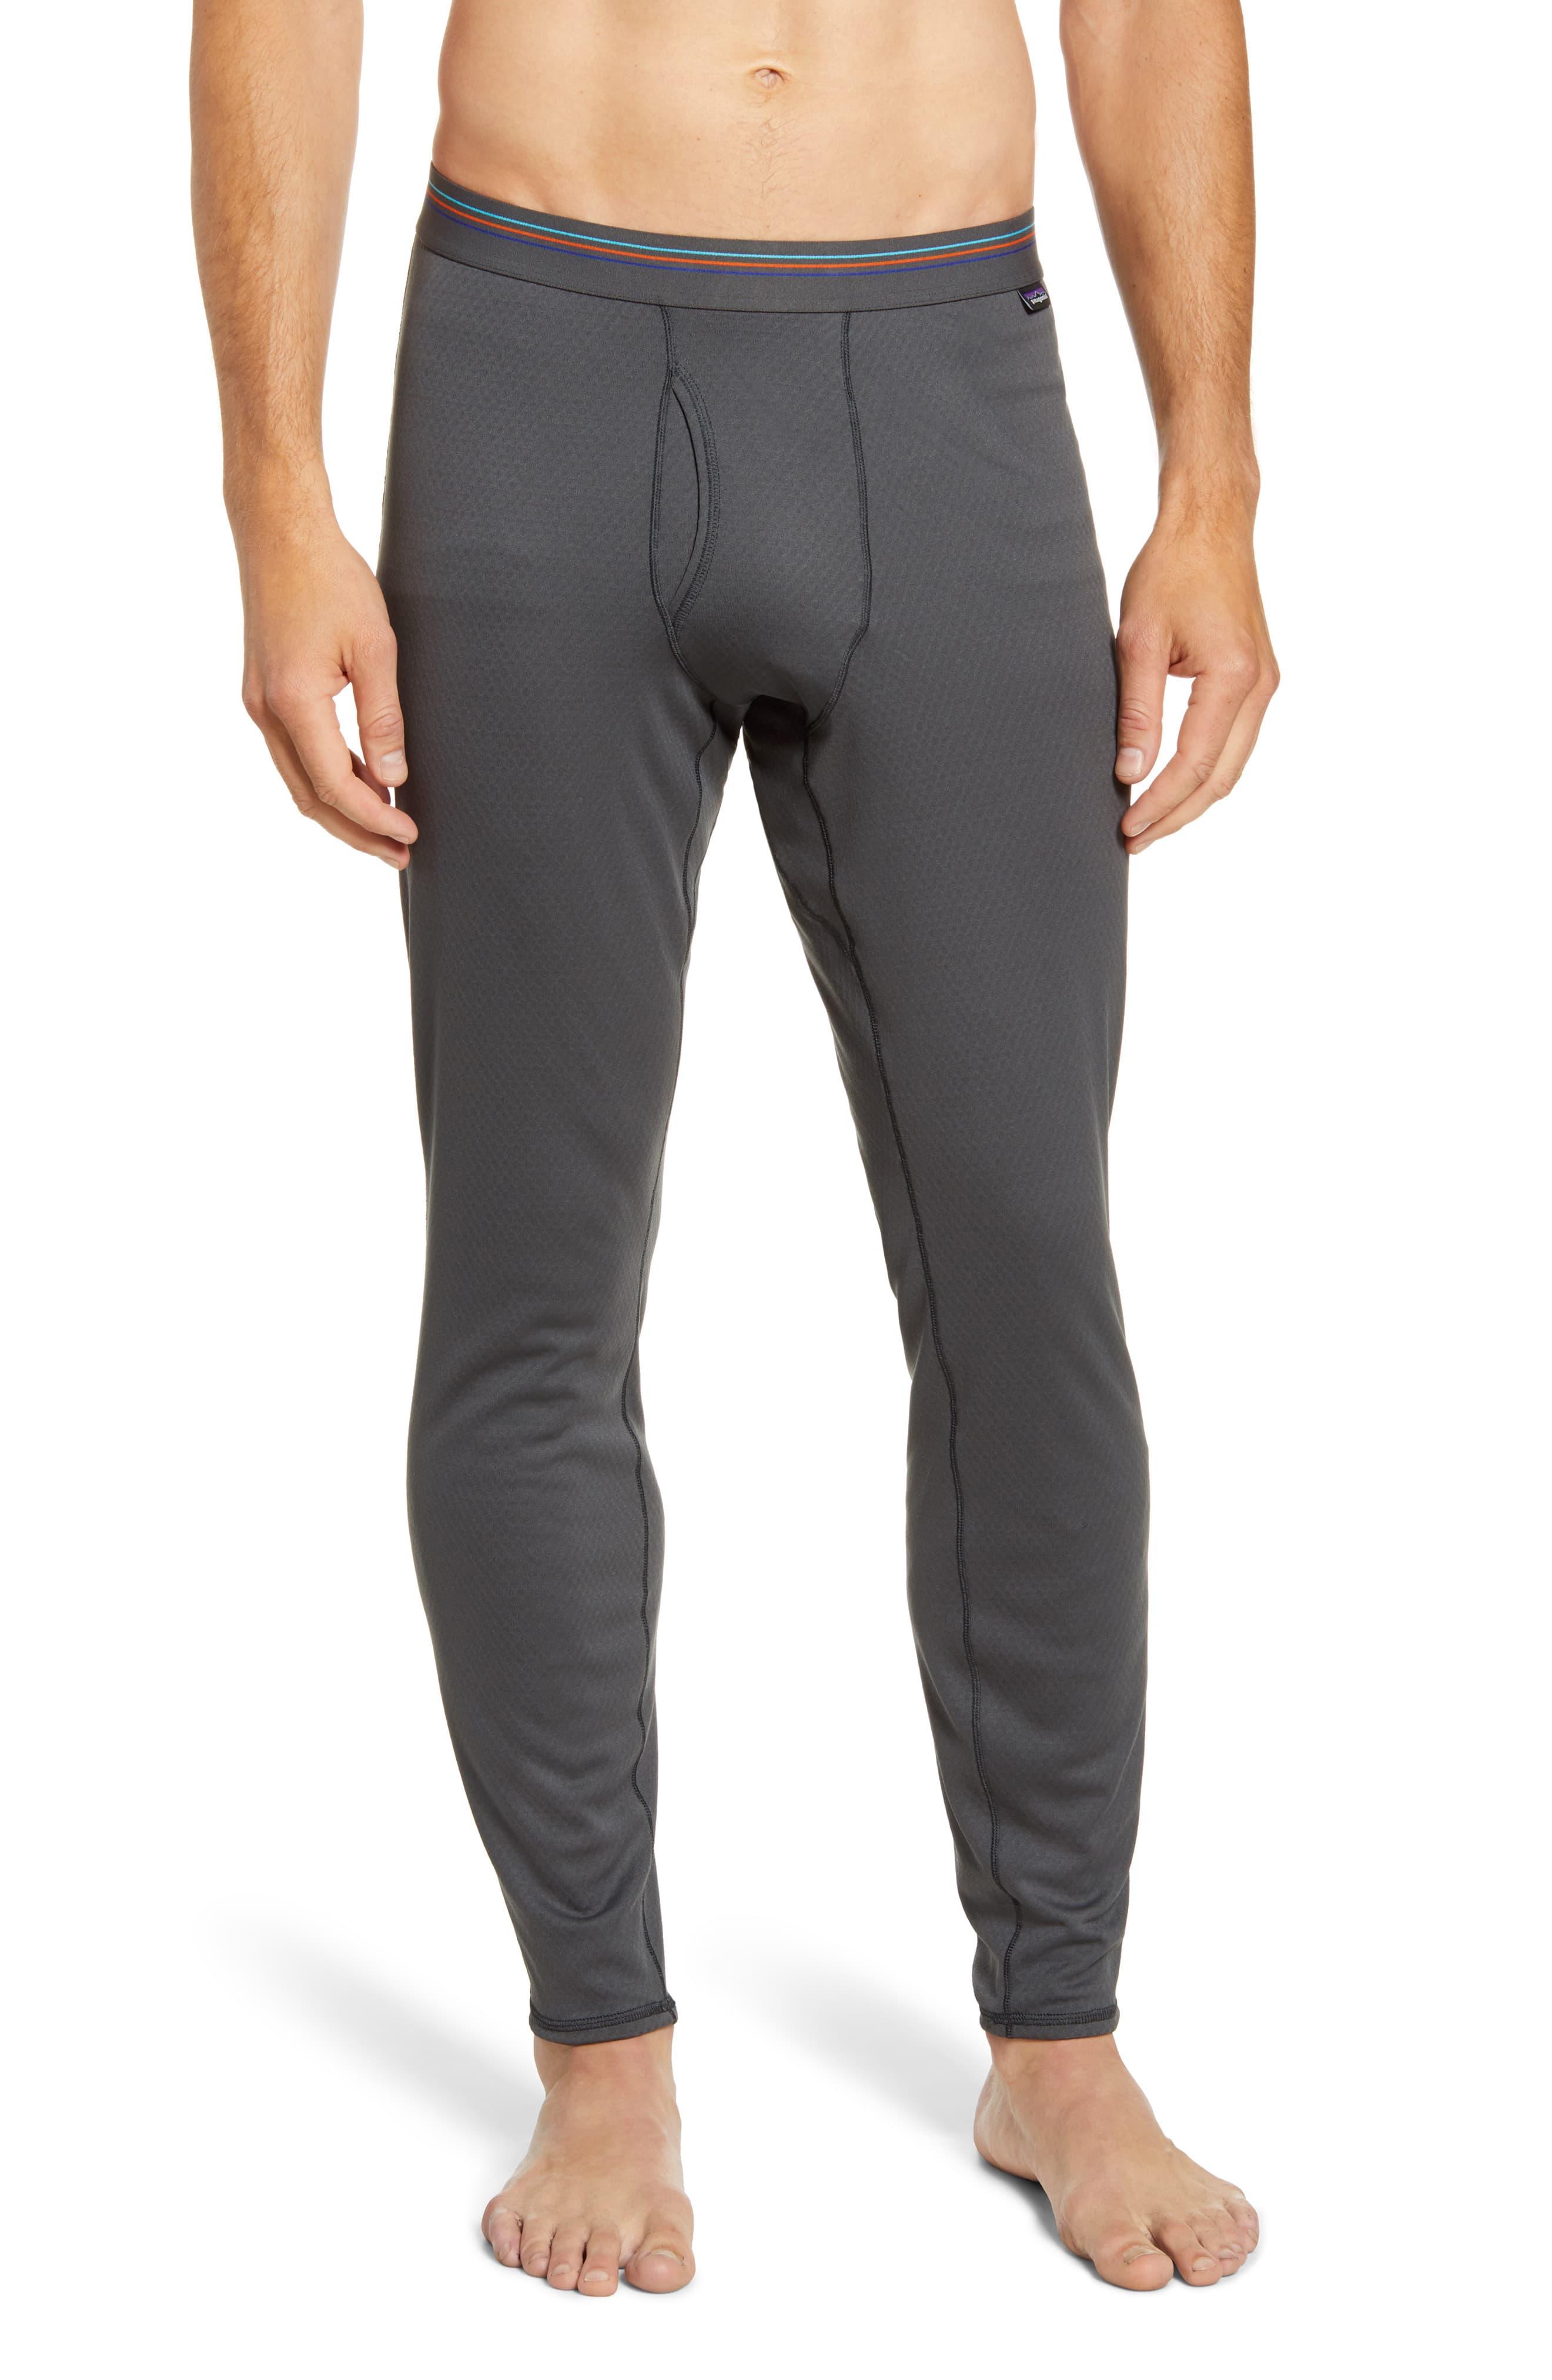 Patagonia Capilene Midweight Base Layer Tights in Gray for Men - Lyst